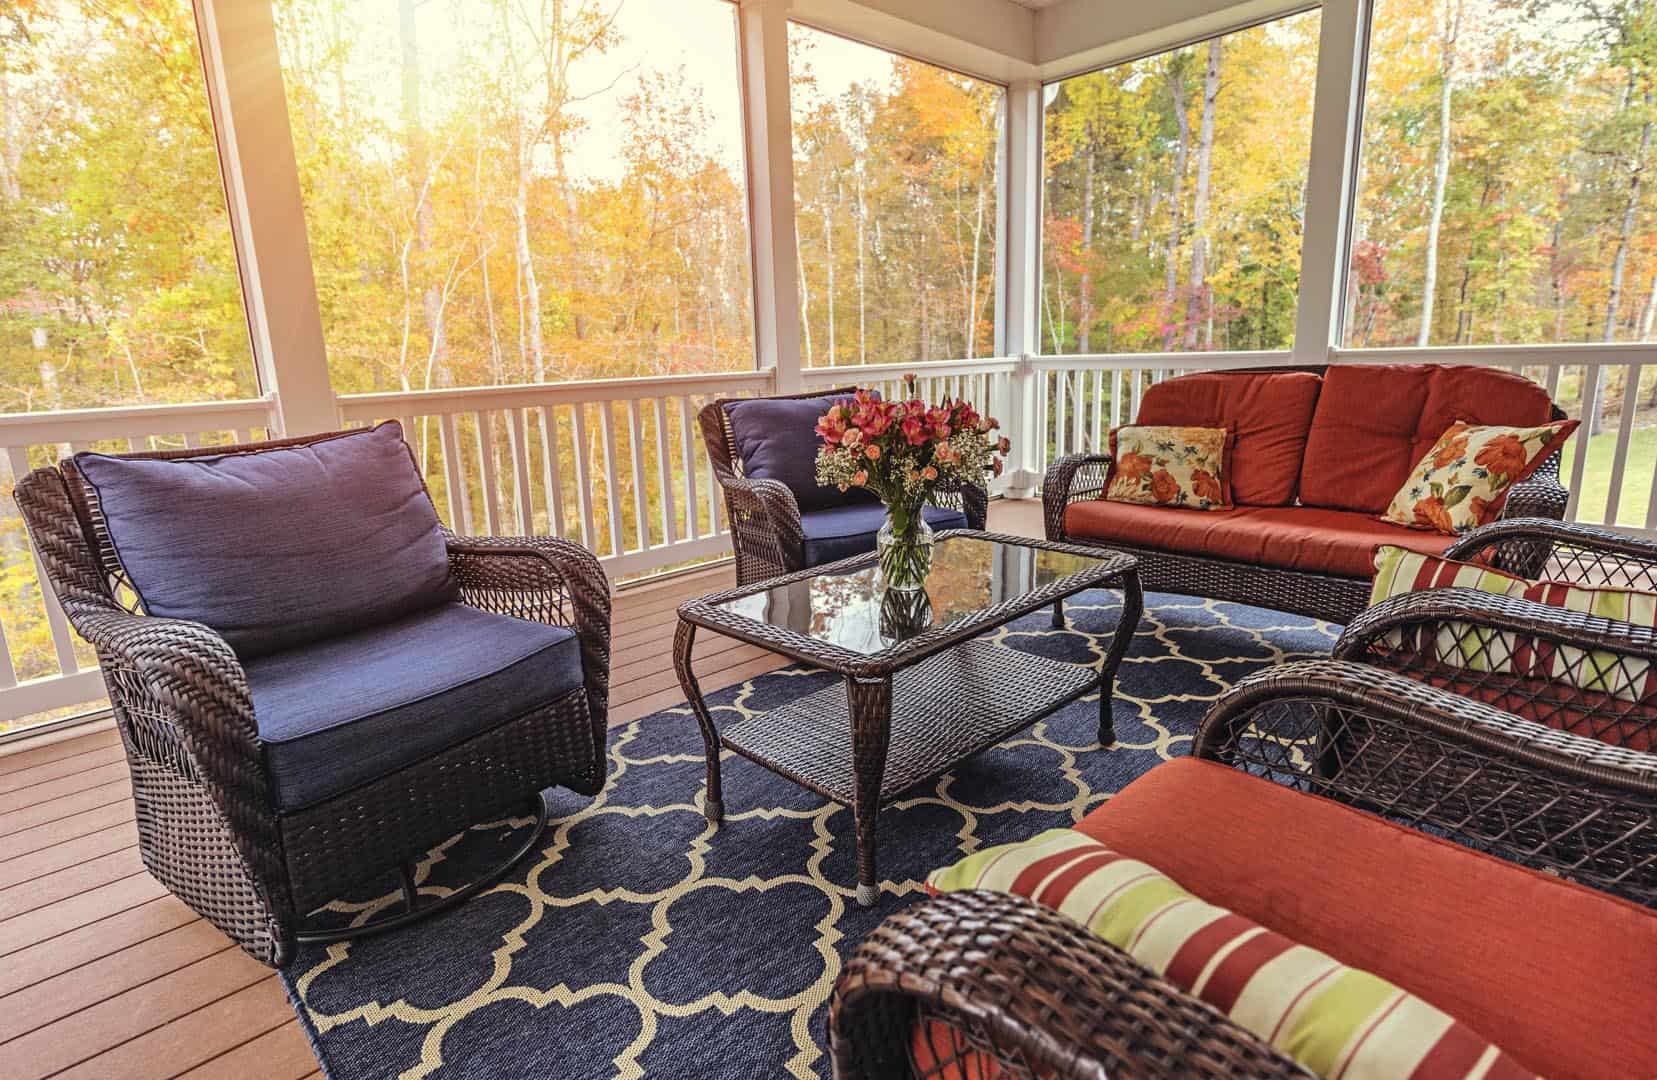 Beautiful screened in porch during the fall